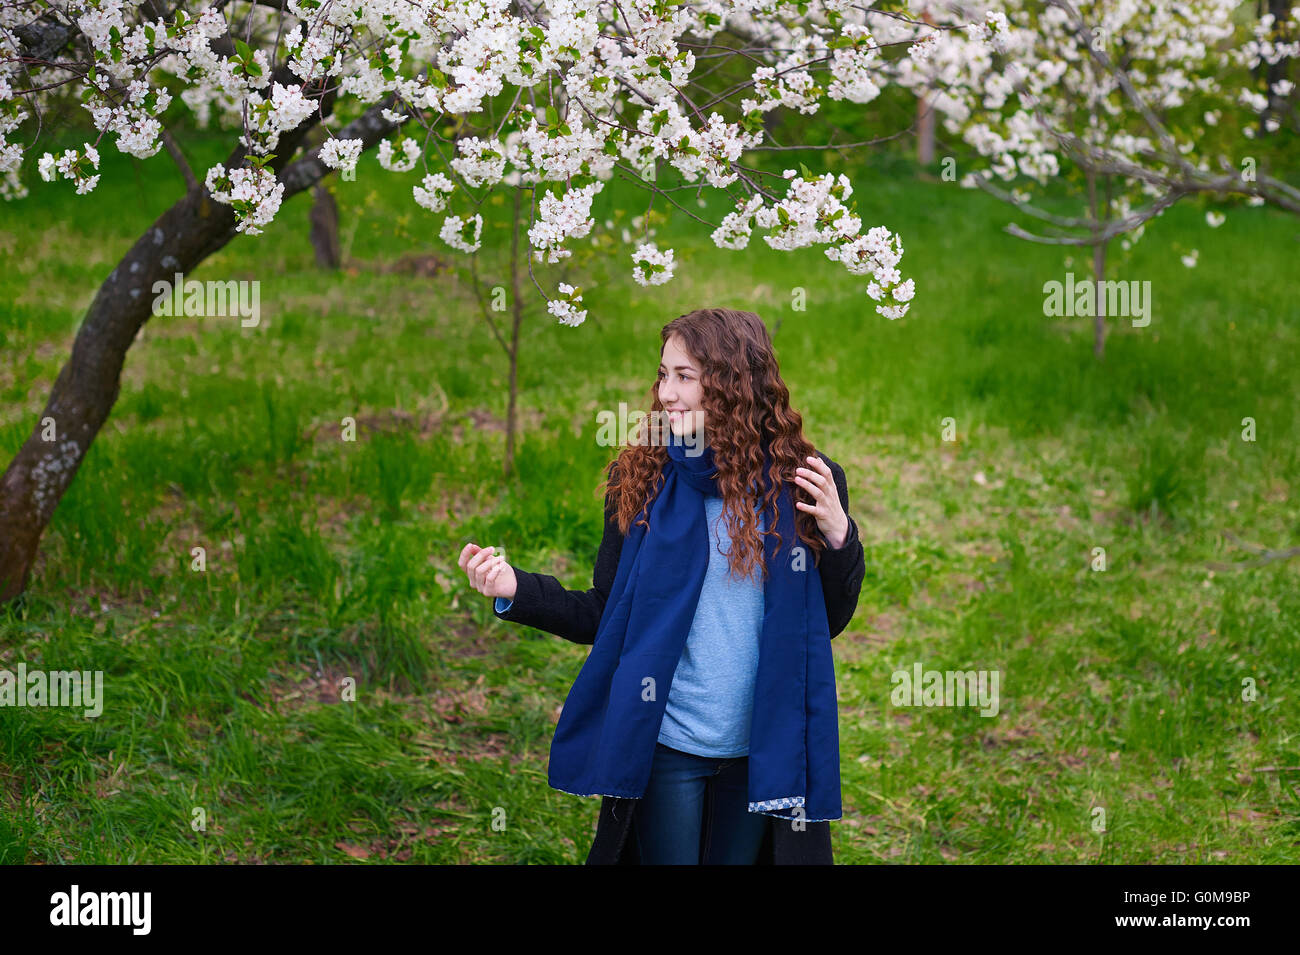 Portrait of young beautiful woman in spring blossom trees Stock Photo